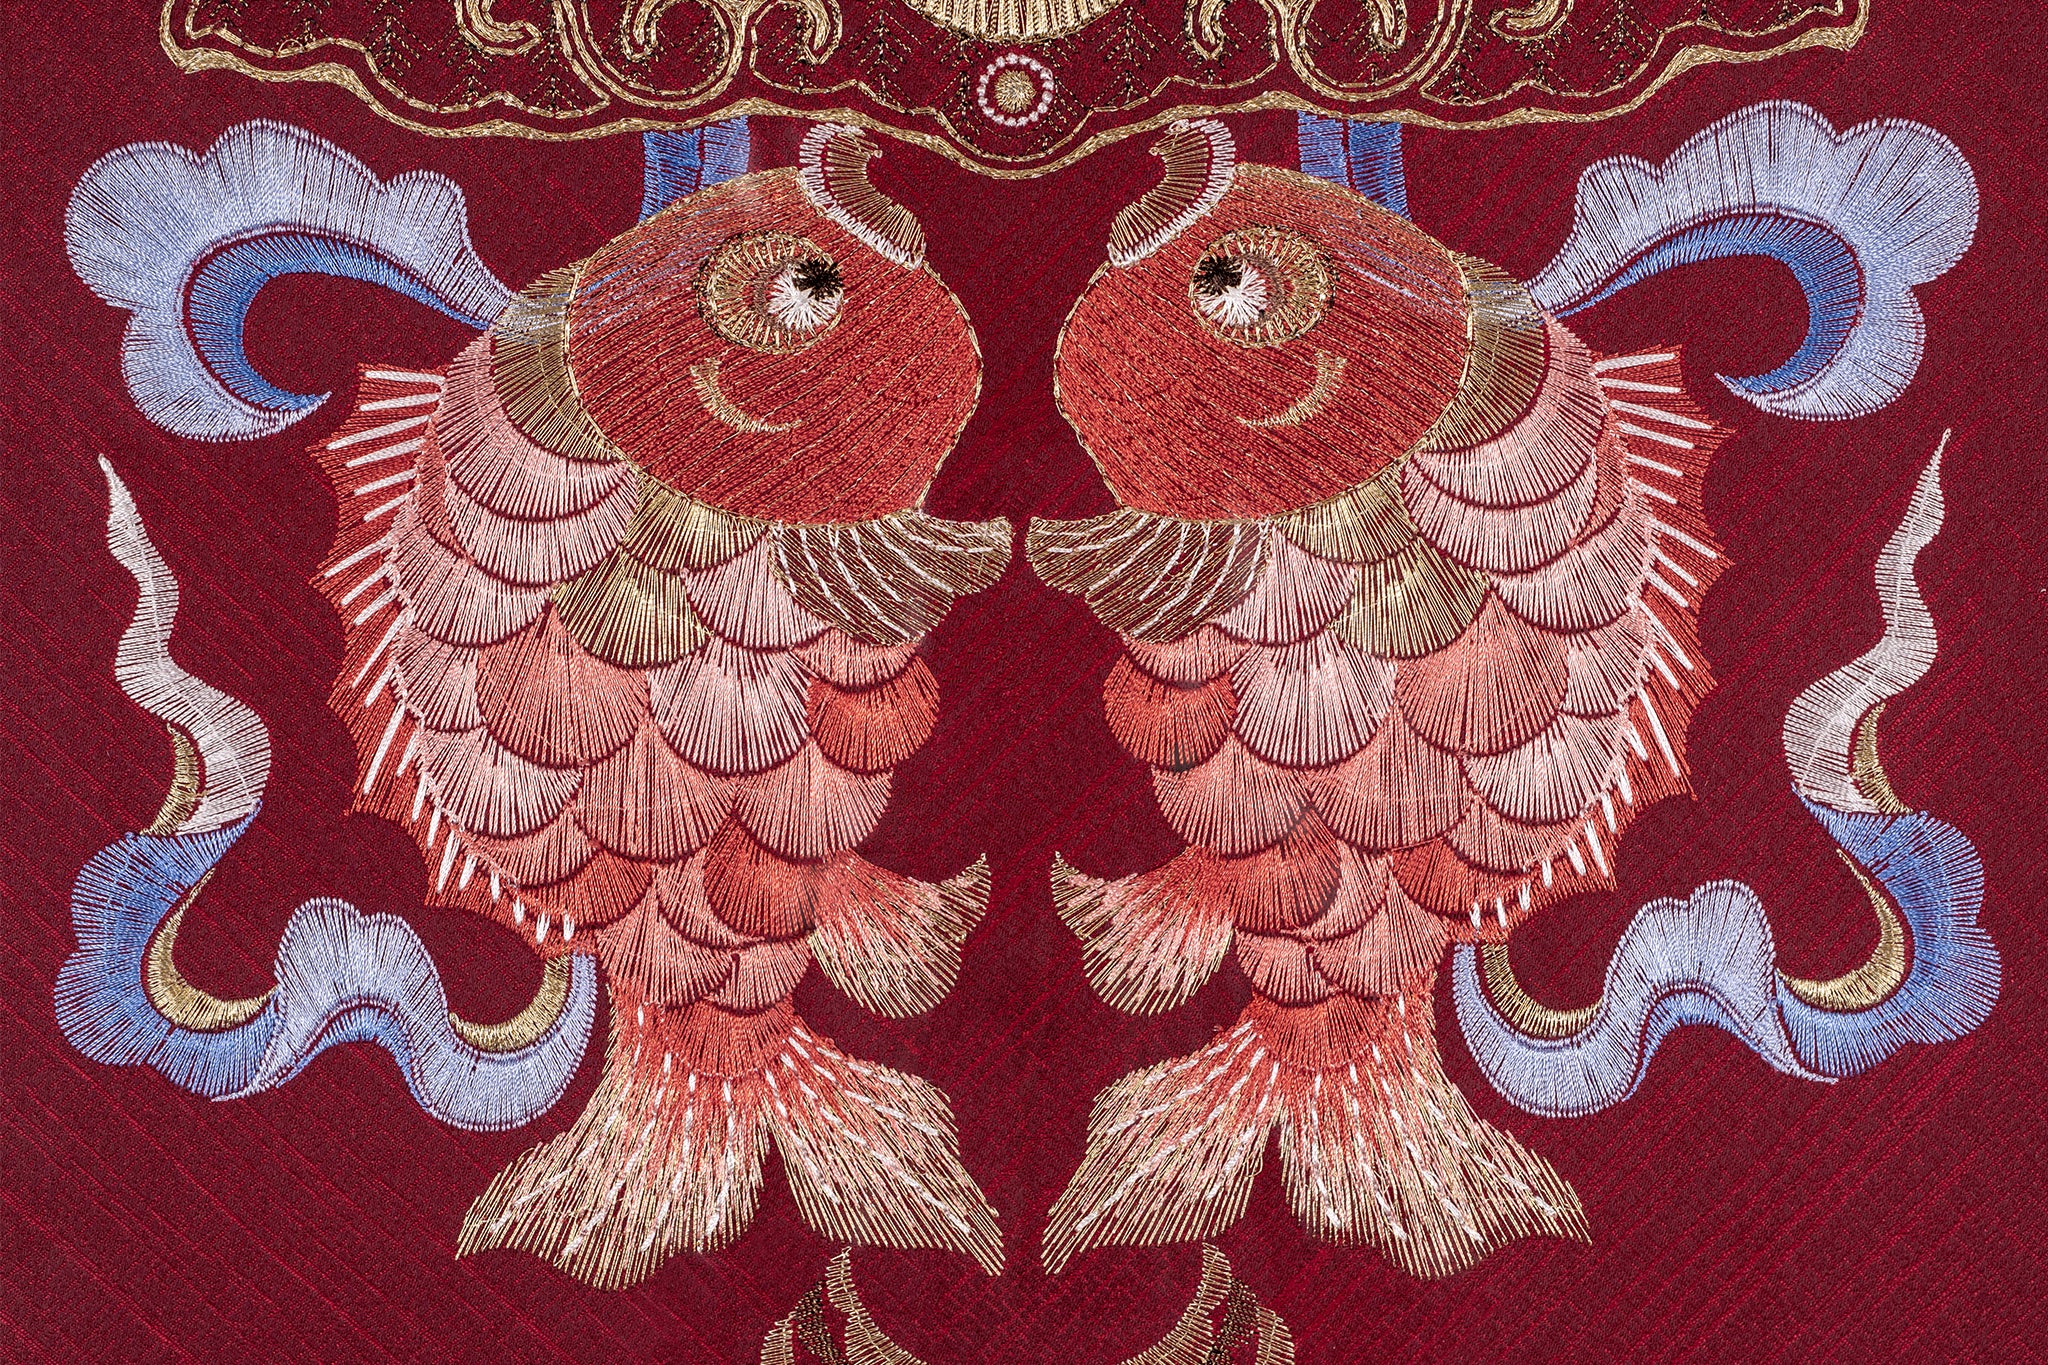 An embroidered work of art with a red background, embroidered with two koi carp.